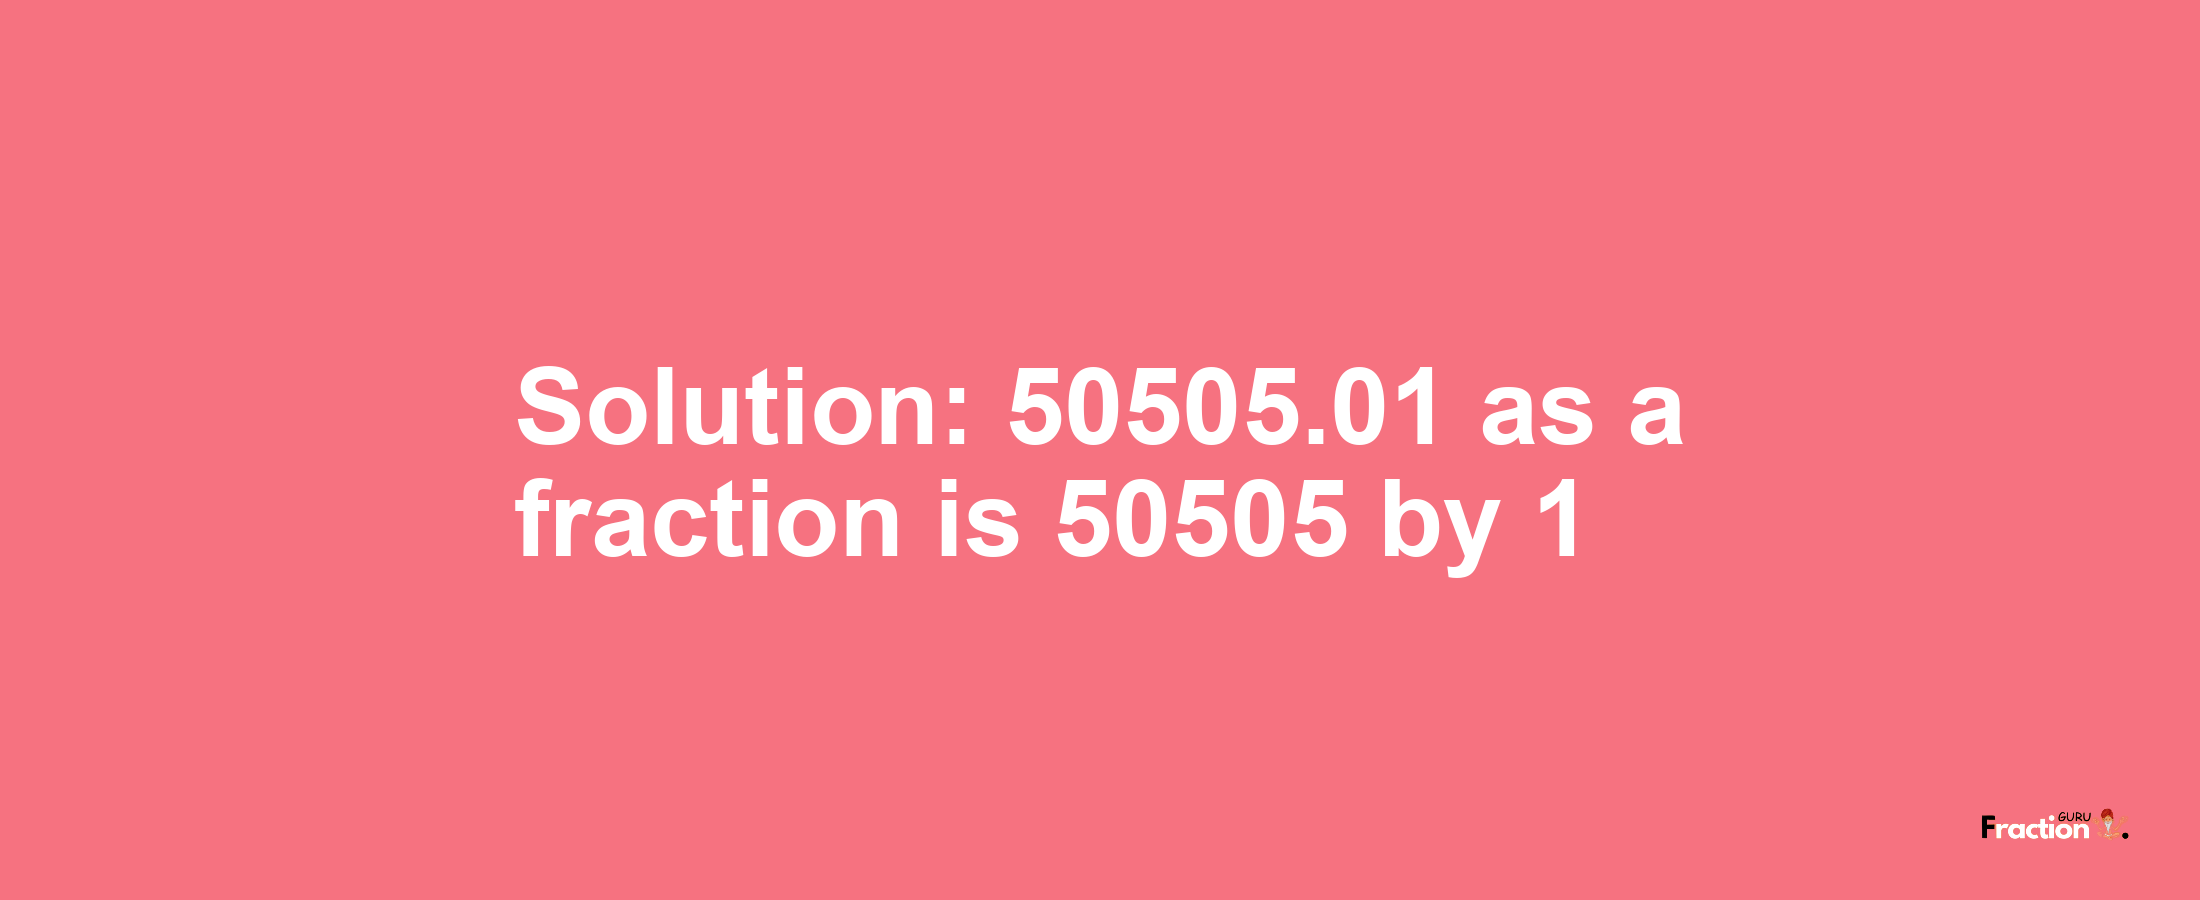 Solution:50505.01 as a fraction is 50505/1